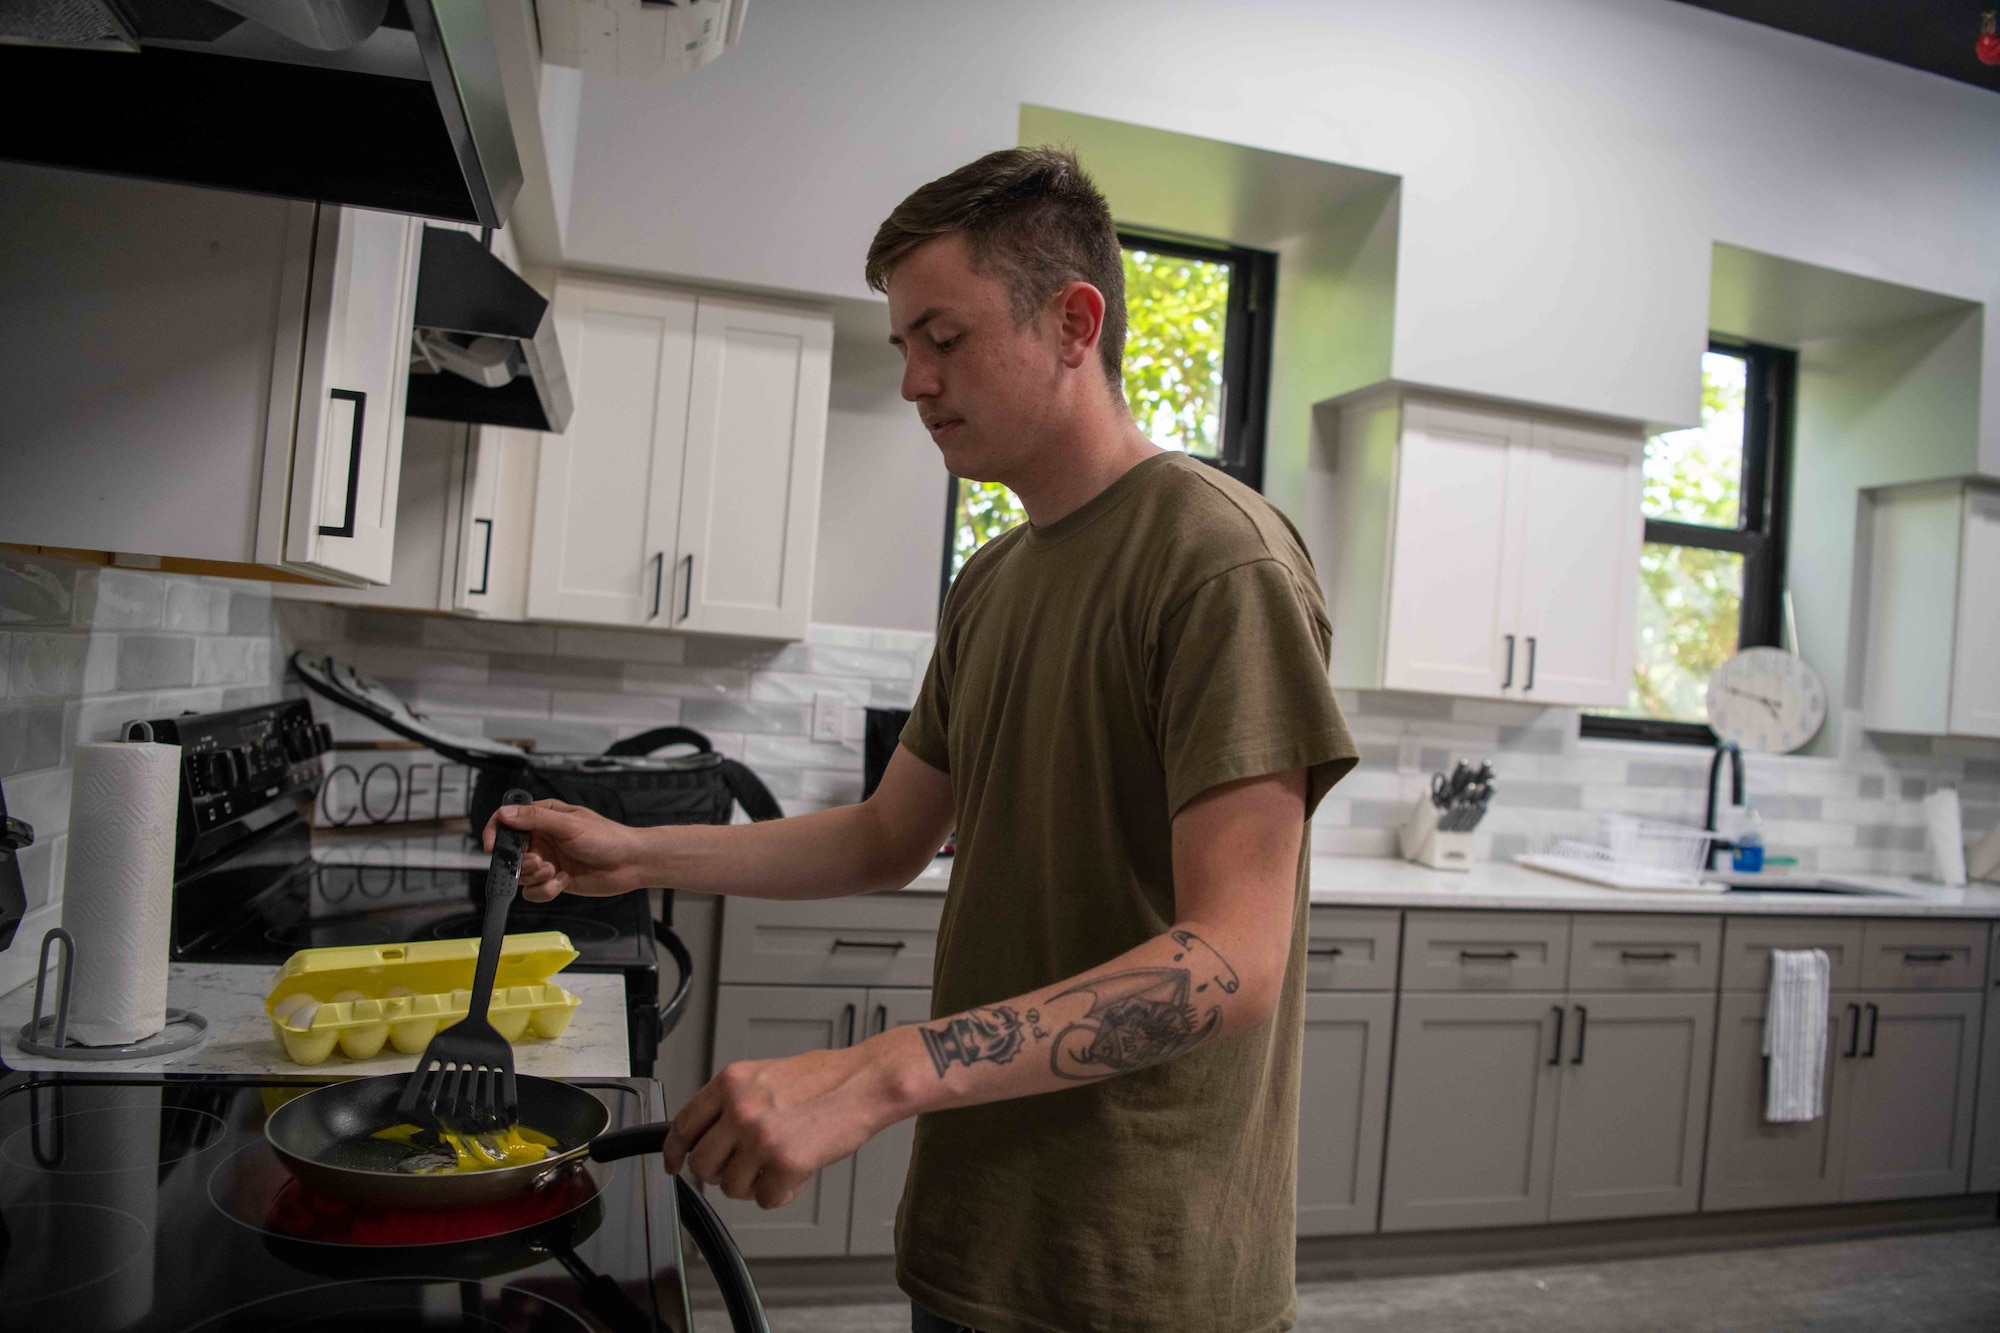 Airman James Stewart, 22nd LRS Fuels Systems Operator, cooks eggs in the newly-built kitchen that recently opened in a McConnell Dormitory June 14, 2022, at McConnell Air Force Base, Kansas. The airmen living in the dorms don't have individual kitchens, so a new communal kitchen was built. (U.S. Air Force photo by Airman William Lunn)